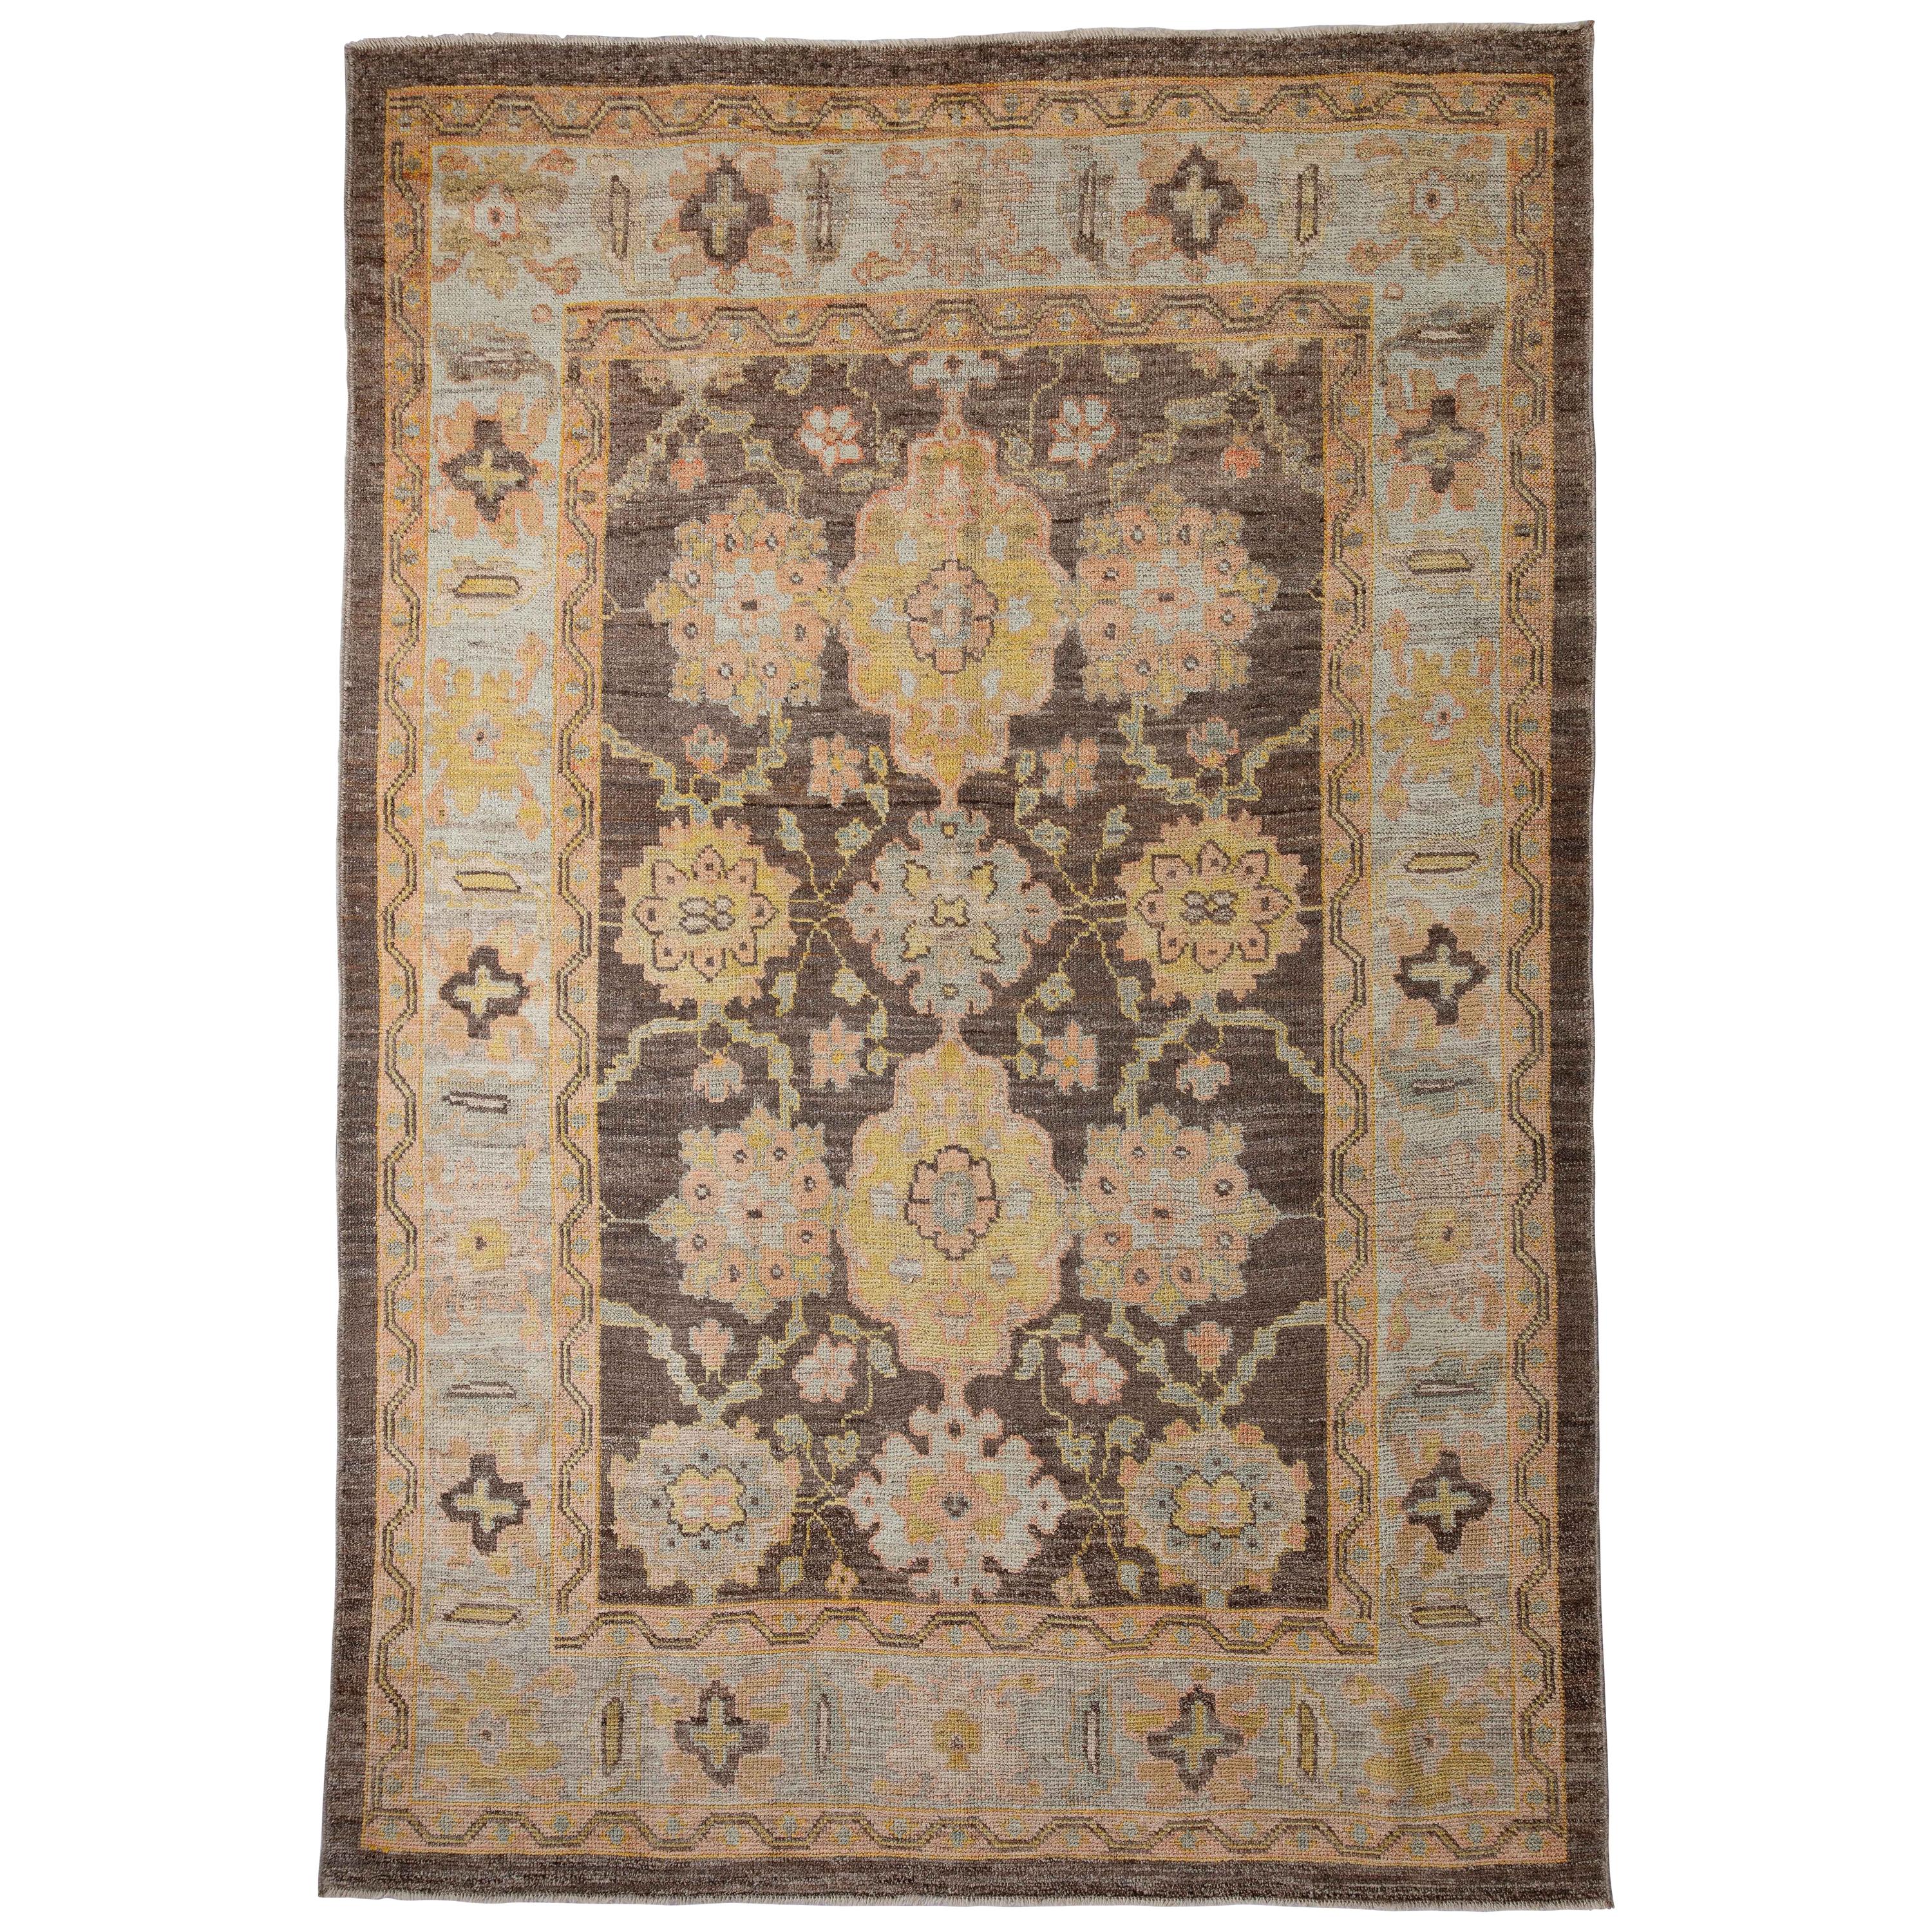 Modern Turkish Oushak Rug with Ornate Flower Patterns on Brown Center Field For Sale